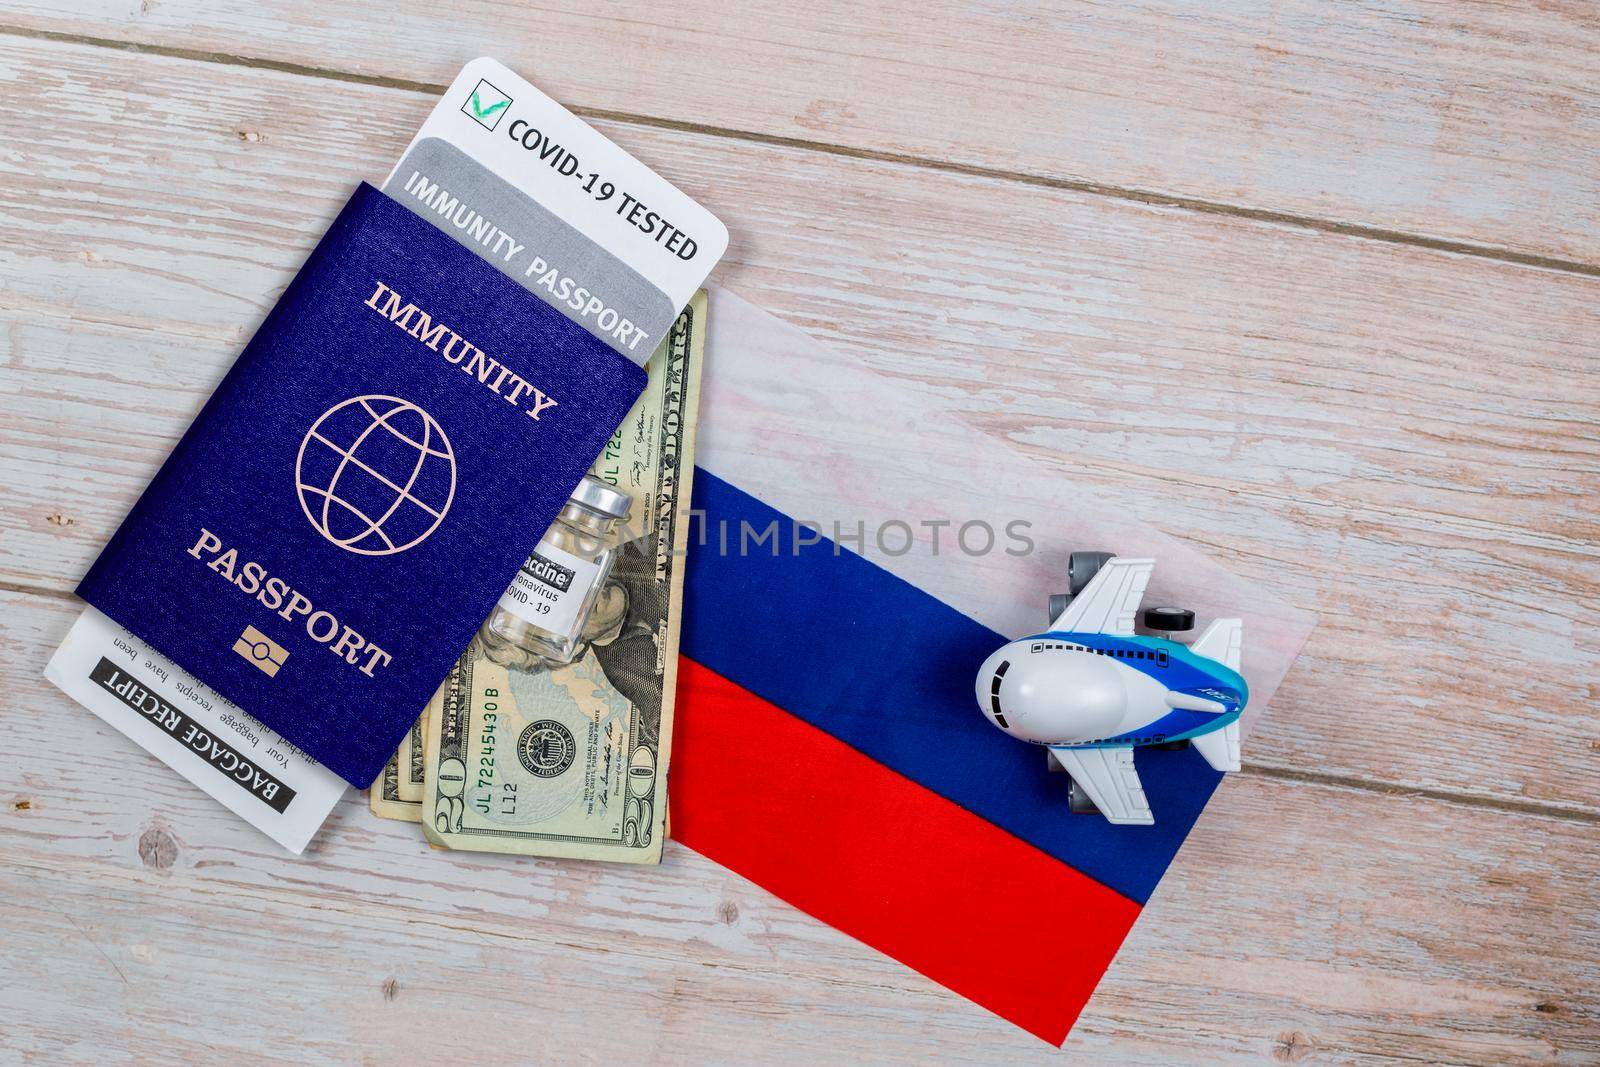 Travel immunity Passport Mandatory Covid Test. New normal after COVID-19 pandemic. Vaccination passport against covid-19 in Russia. Certificate for people who have had coronavirus or made vaccine.